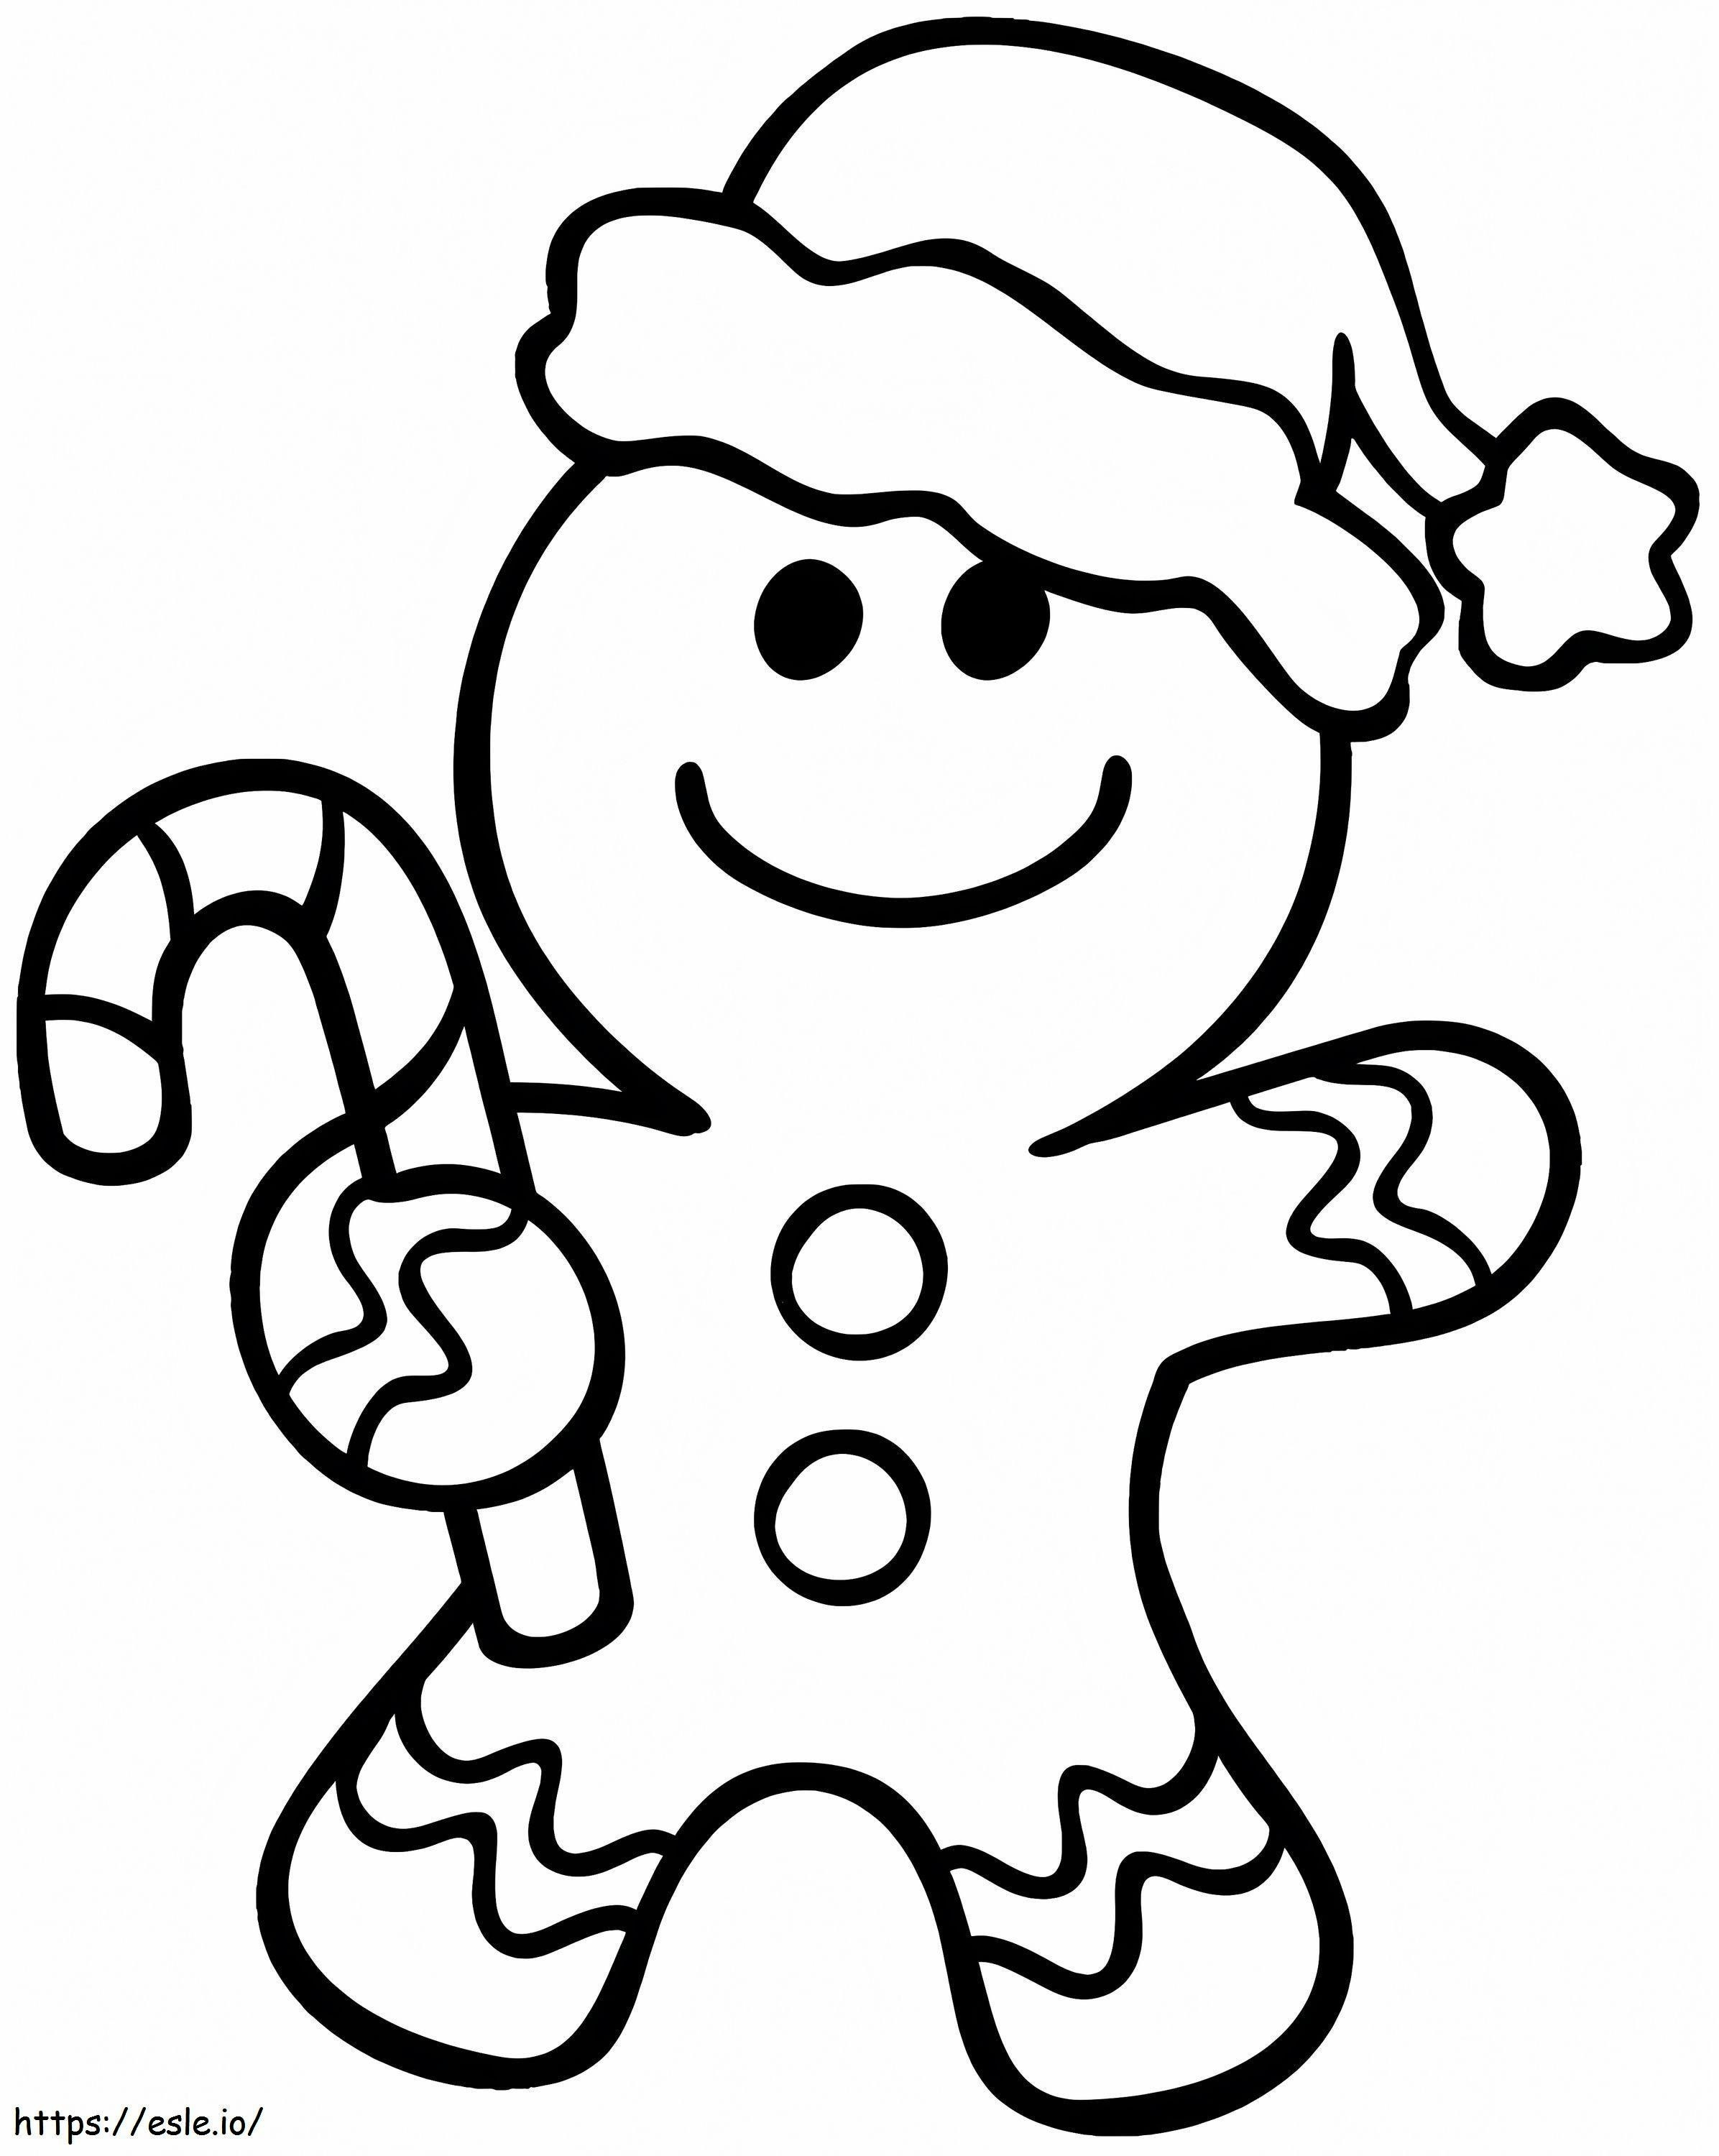 Gingerbread Man On Christmas Day coloring page